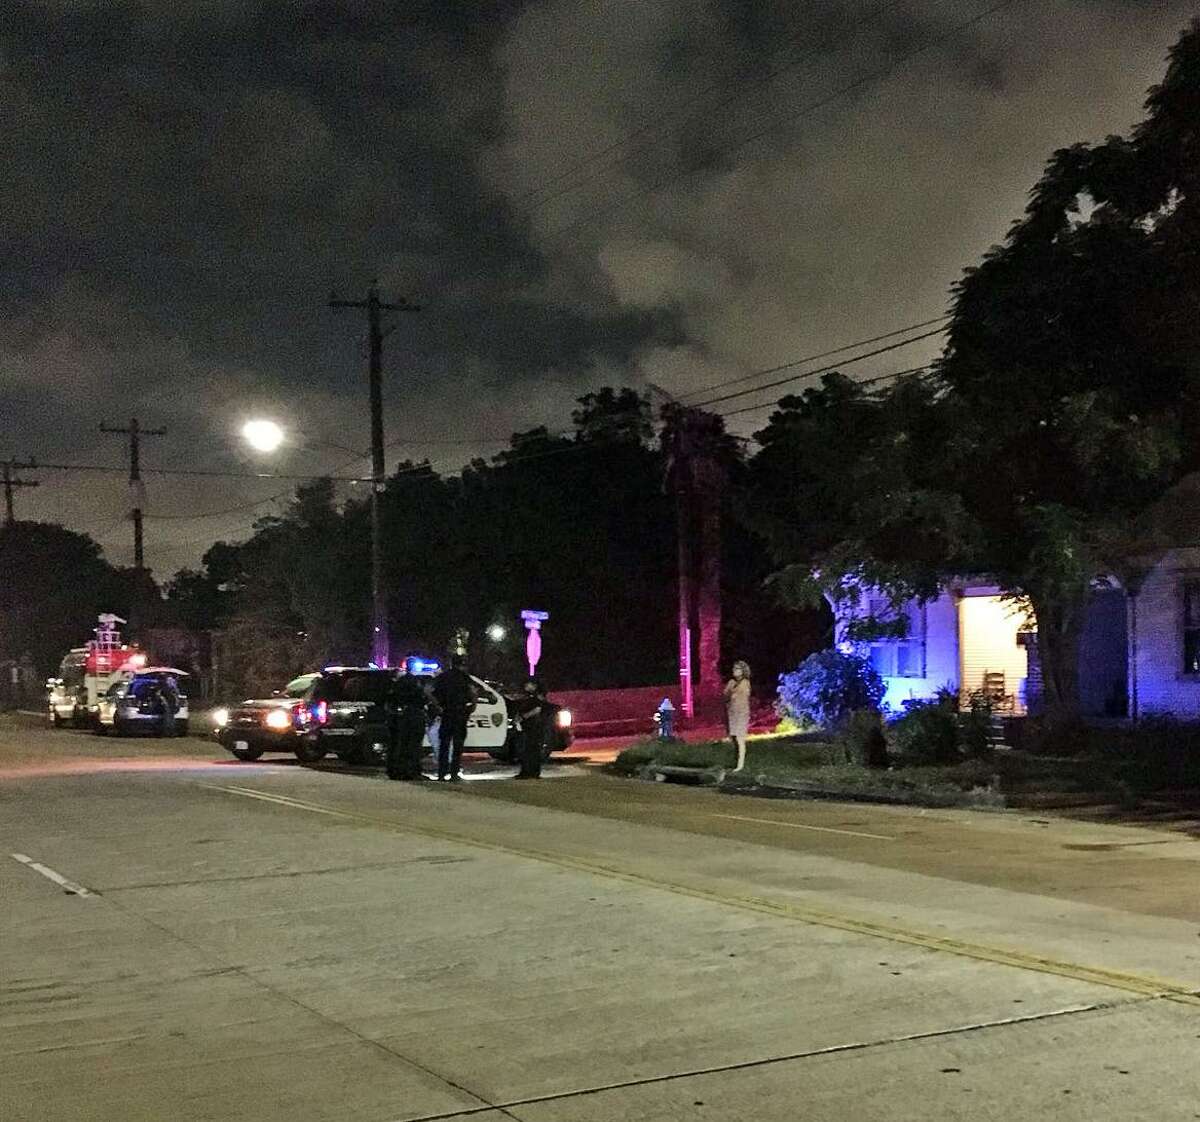 Houston Police detectives were called to investigate a drive-by shooting around 7:43 p.m. Monday, Sept. 5, in south central Houston. One woman was taken to the hospital with non-life threatening injuries.